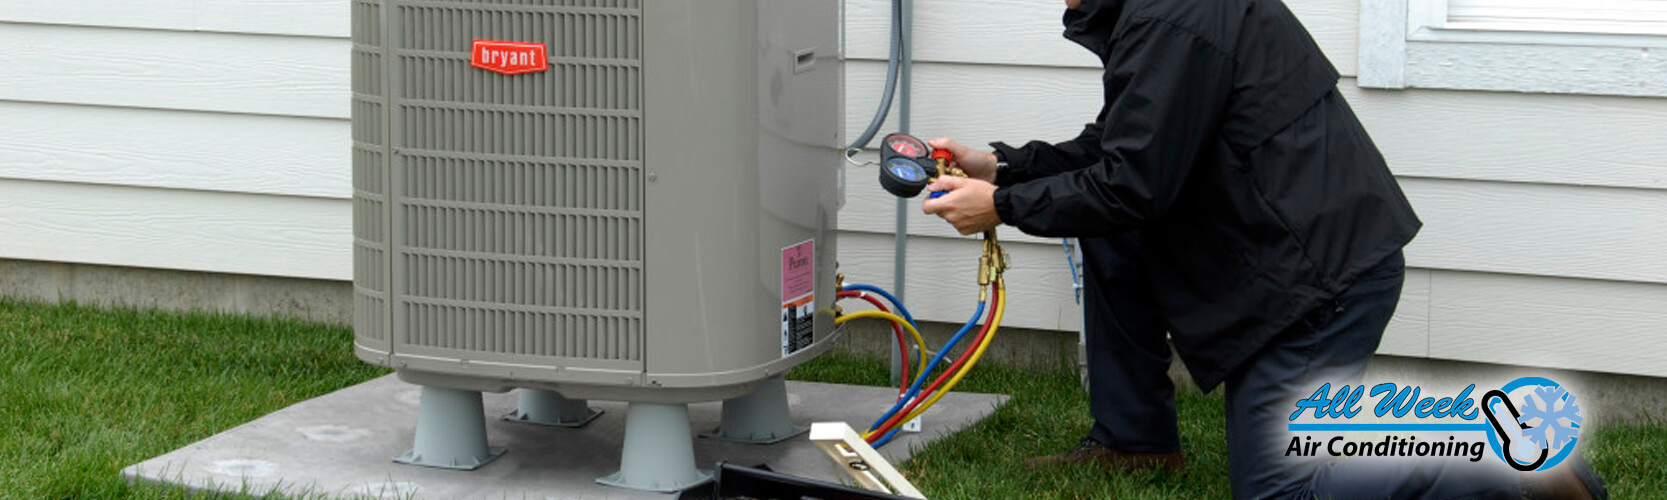 residential air conditioning service nj